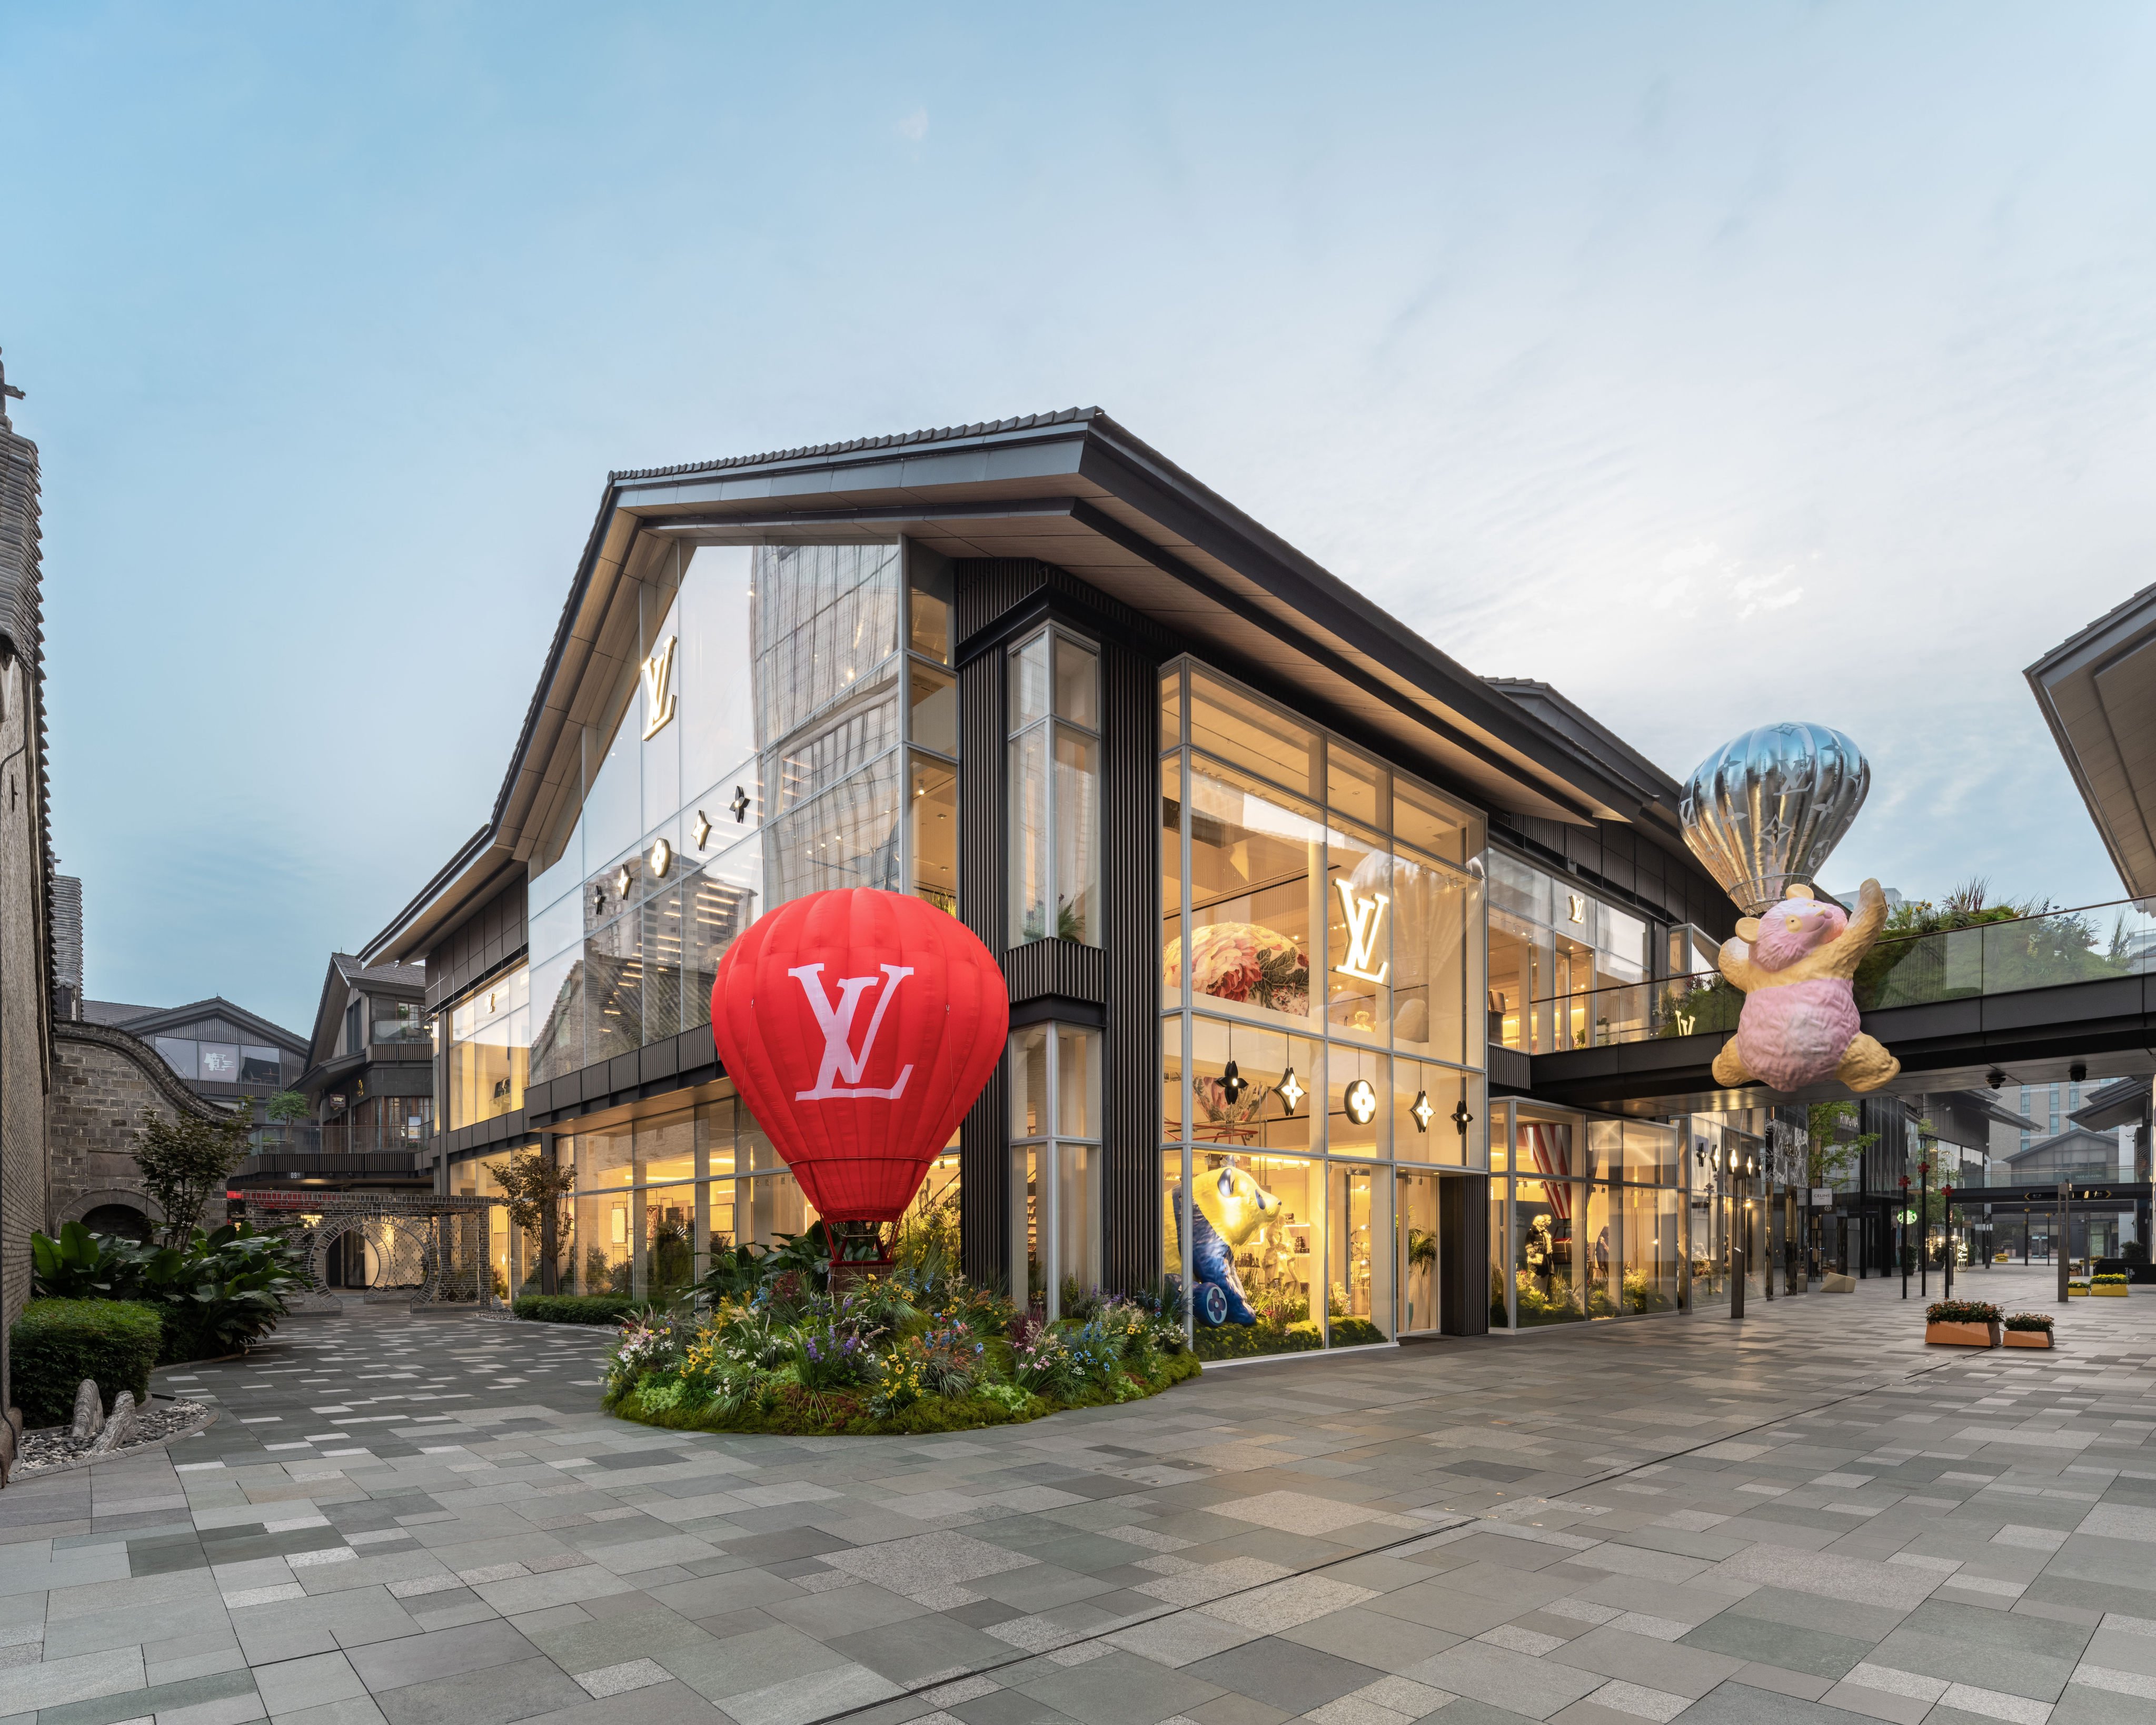 Louis Vuitton’s restaurant in Chengdu is located near its new flagship store in Taikoo Li. Photo: Handout